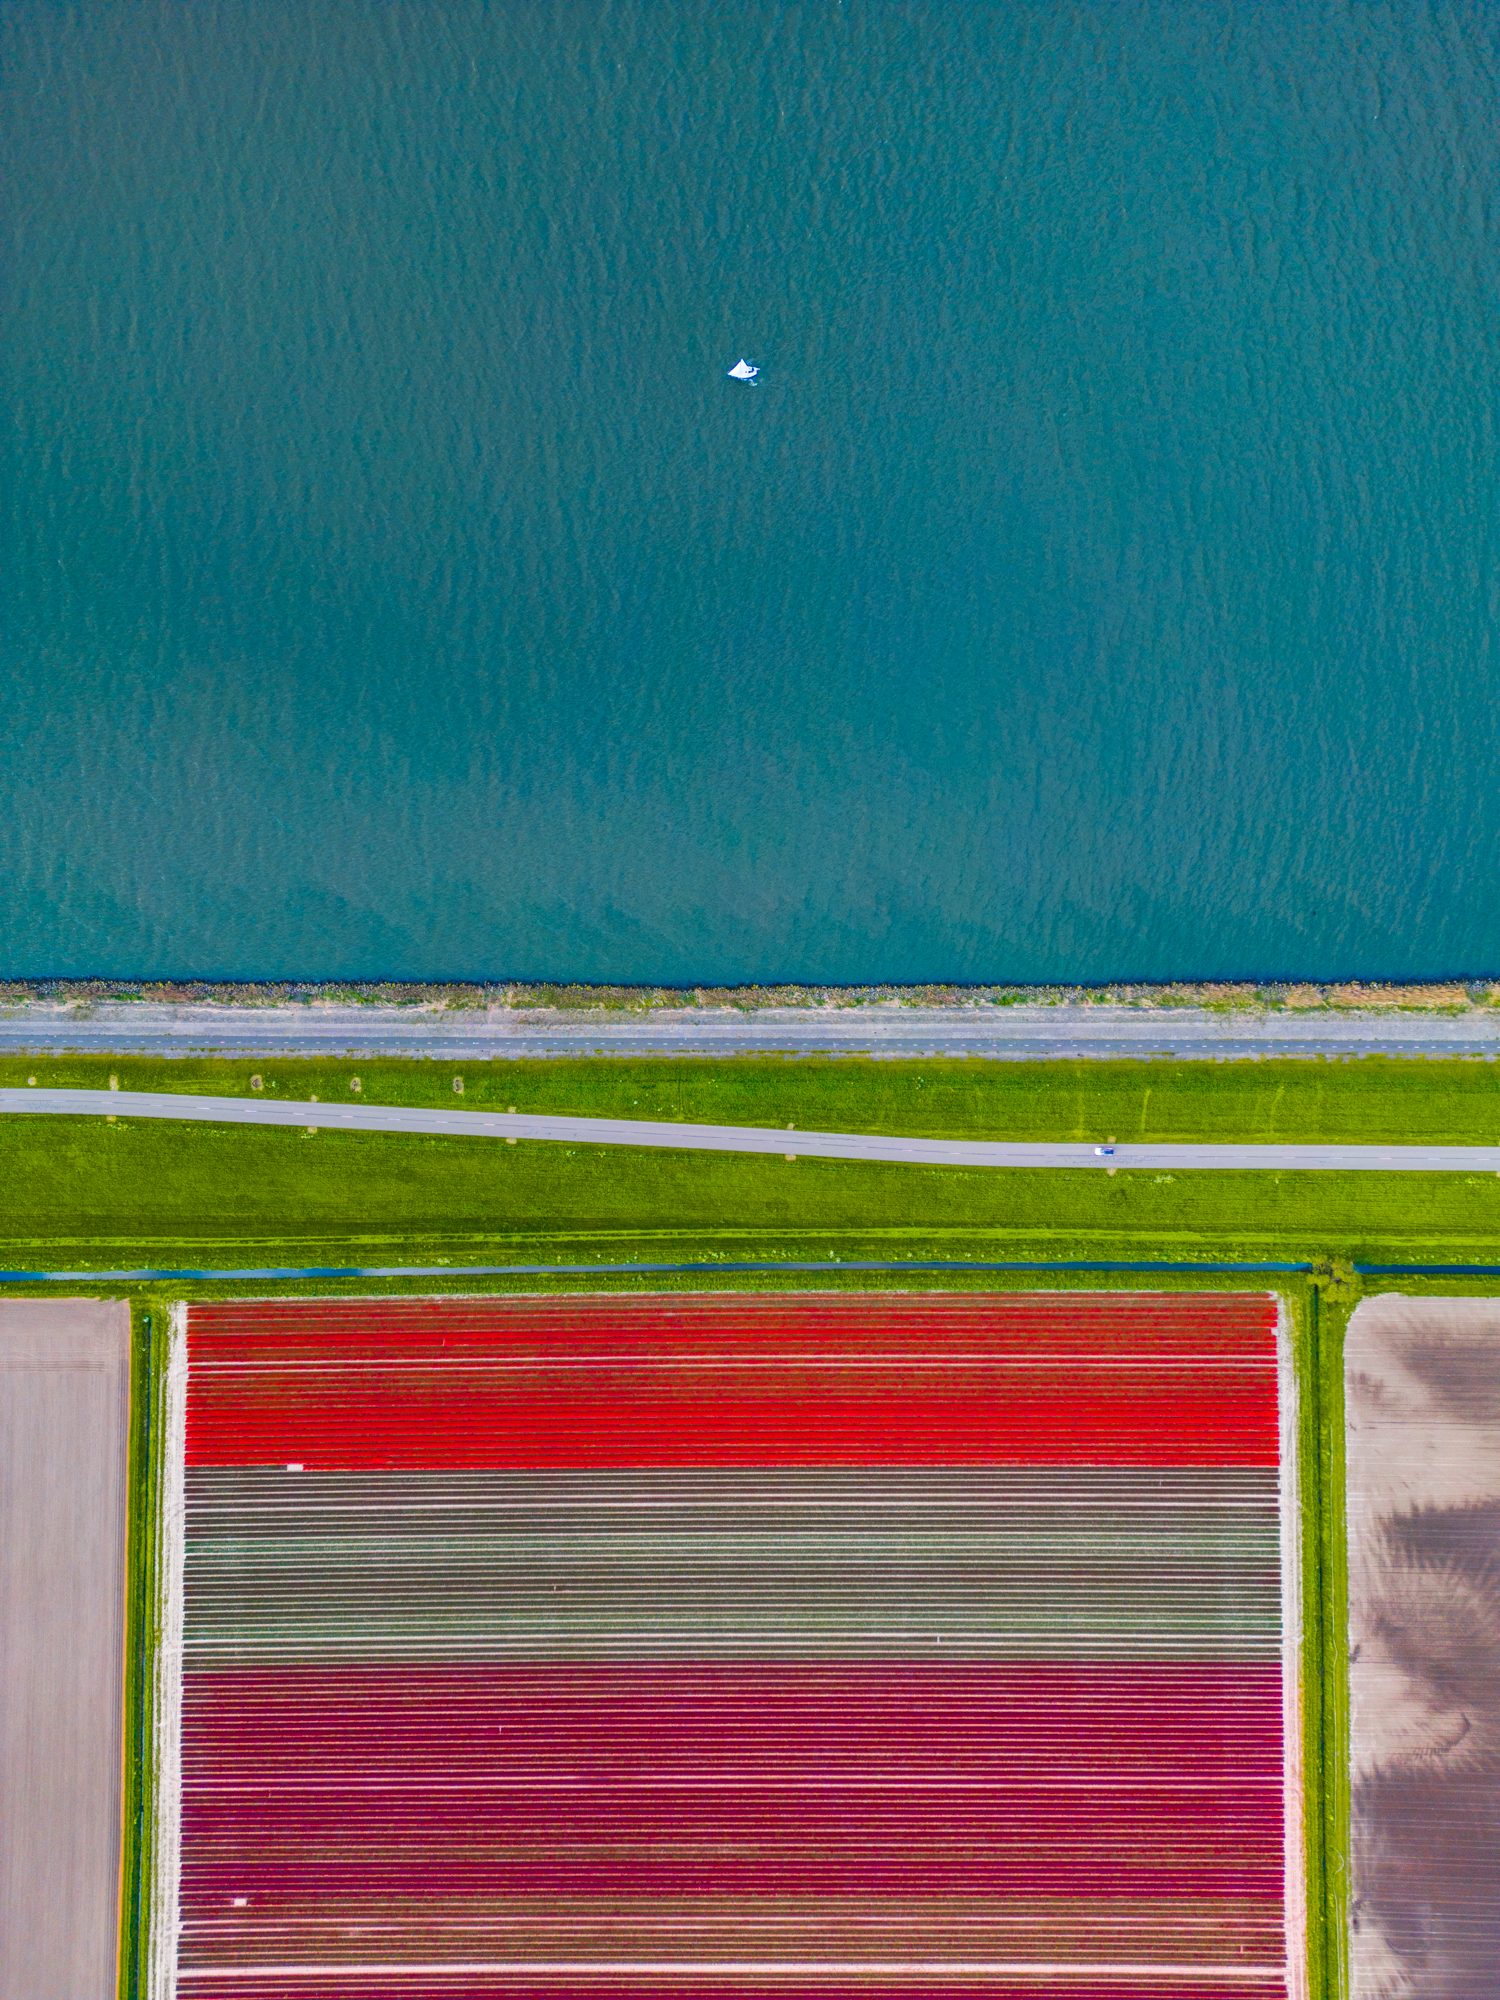 A tulip field right next to the water. I was lucky my boat had just passed by.